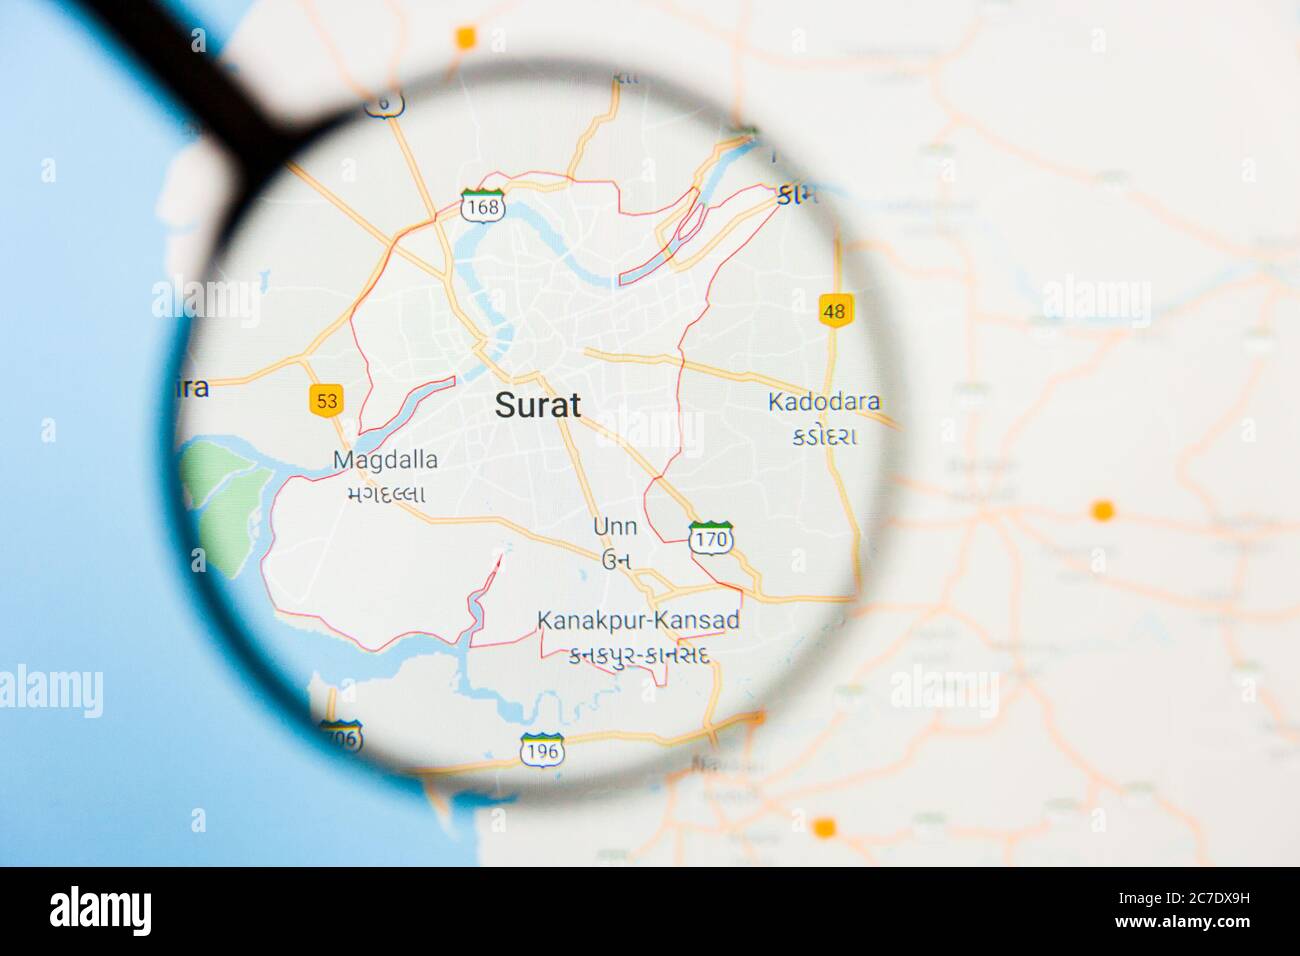 Surat city visualization illustrative concept on display screen through magnifying glass Stock Photo